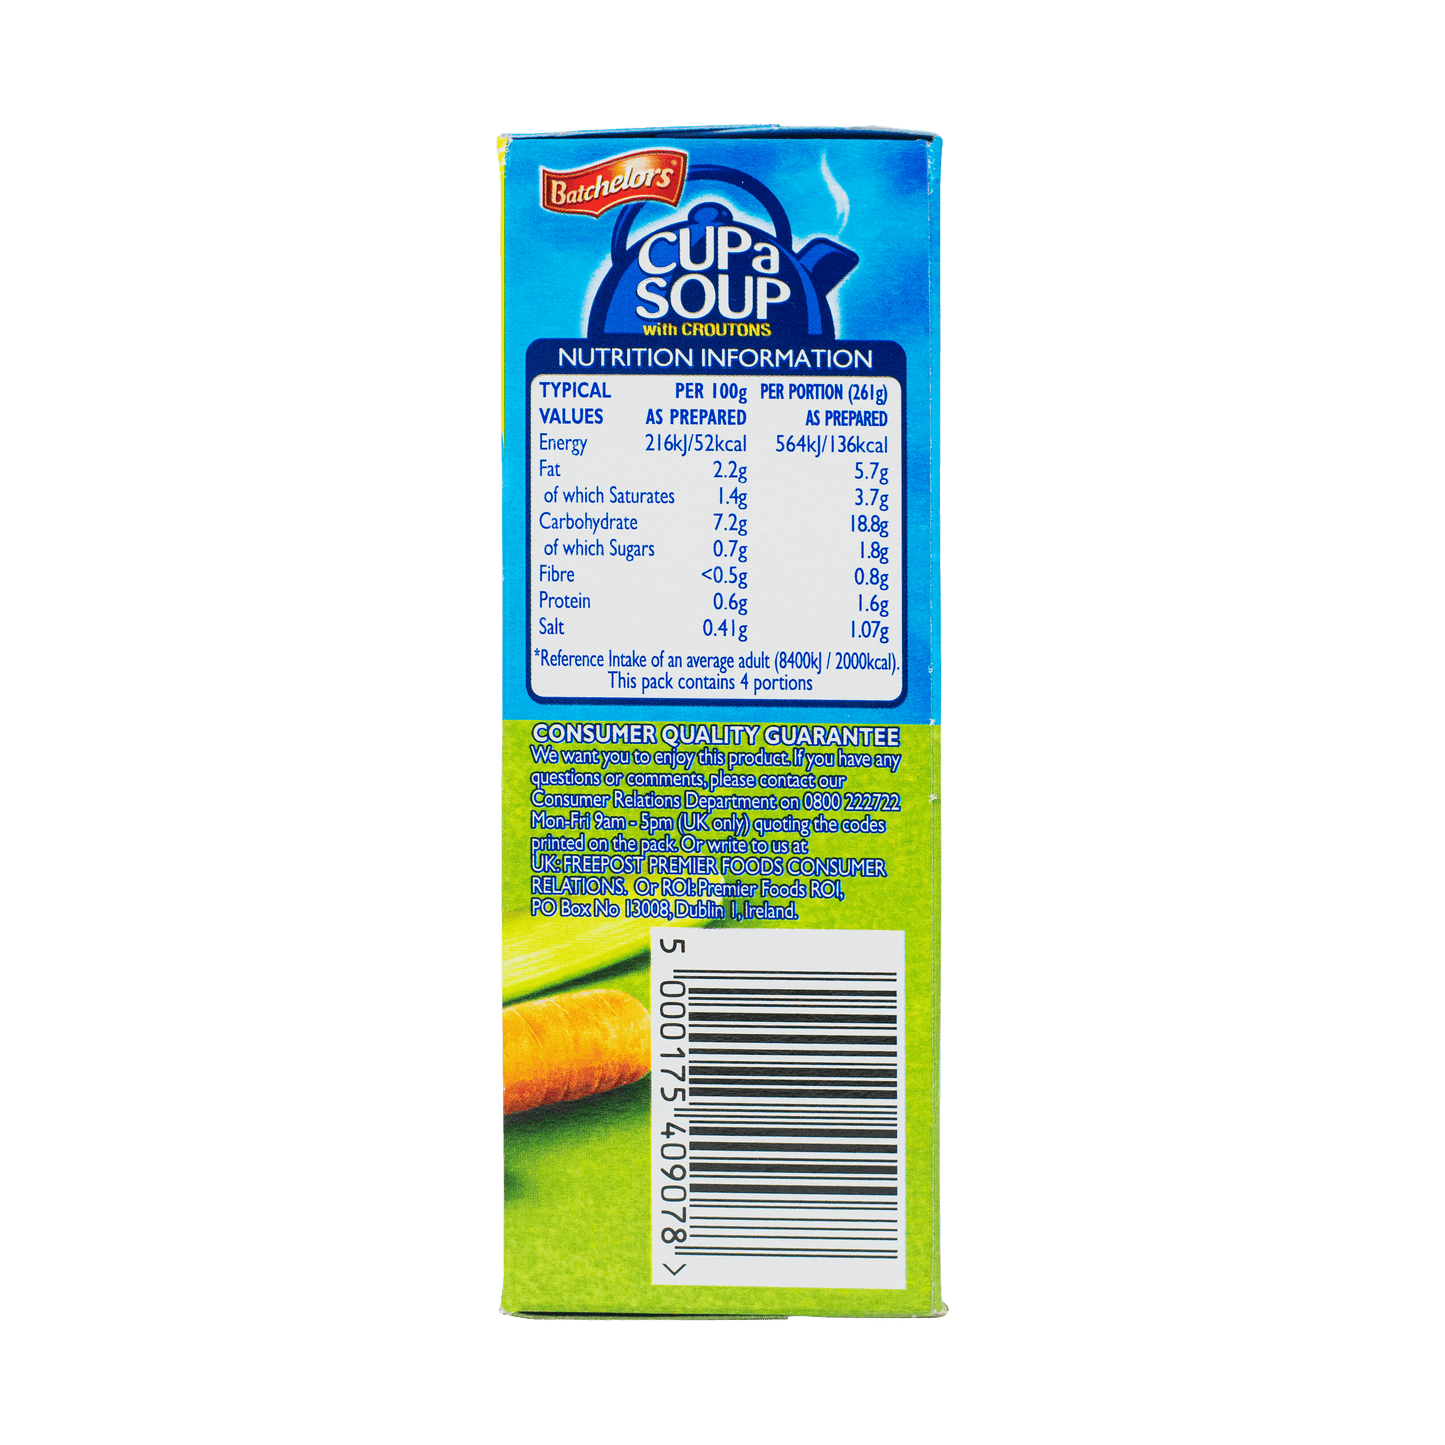 Batchelors Cup a Soup Cream of Vegetable (Pack of 4) 122g